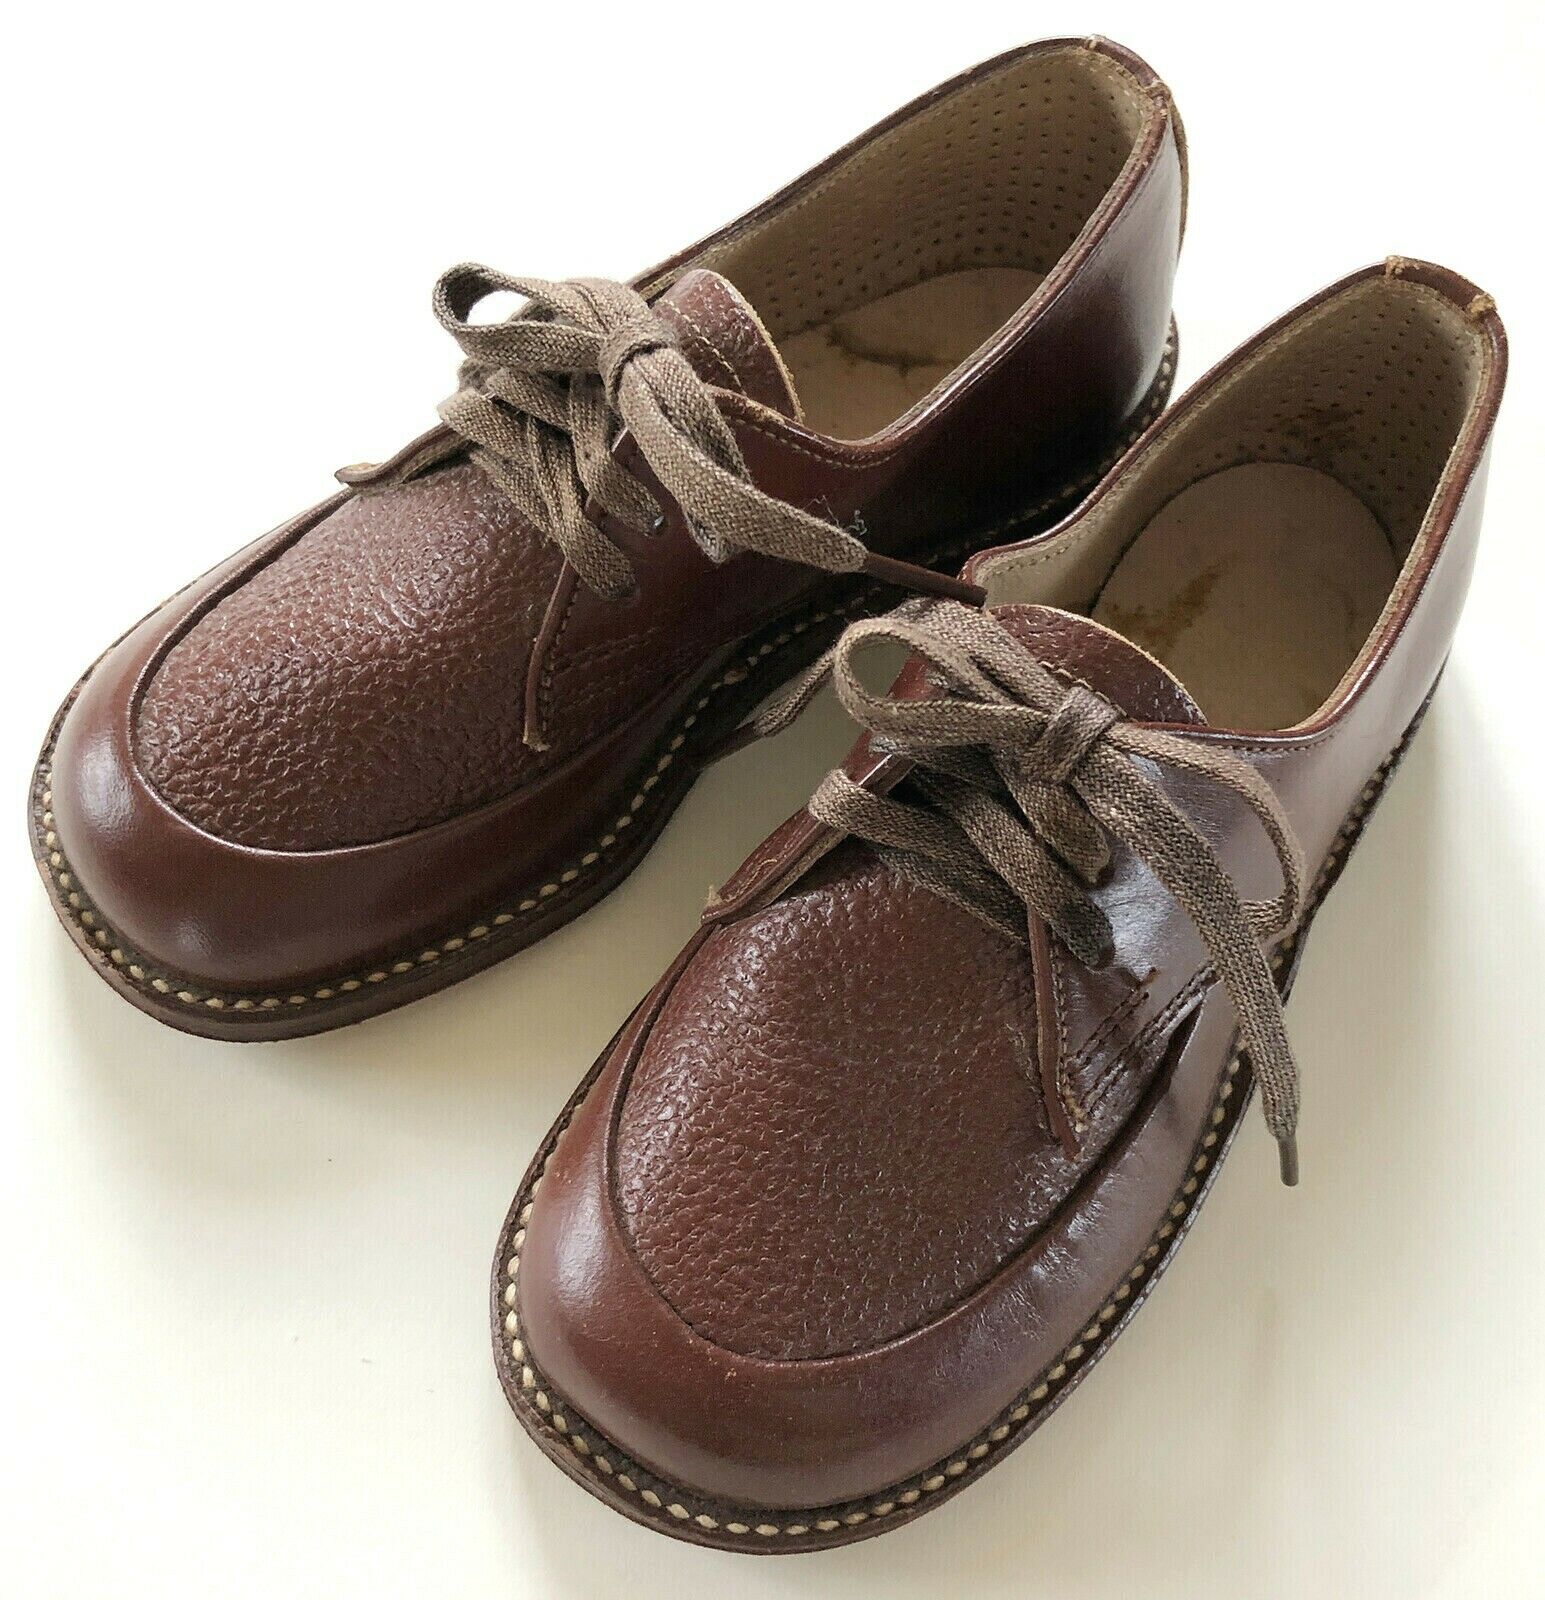 Vintage Brown Leather Toddler Shoes By Step Master- Pat #2316148